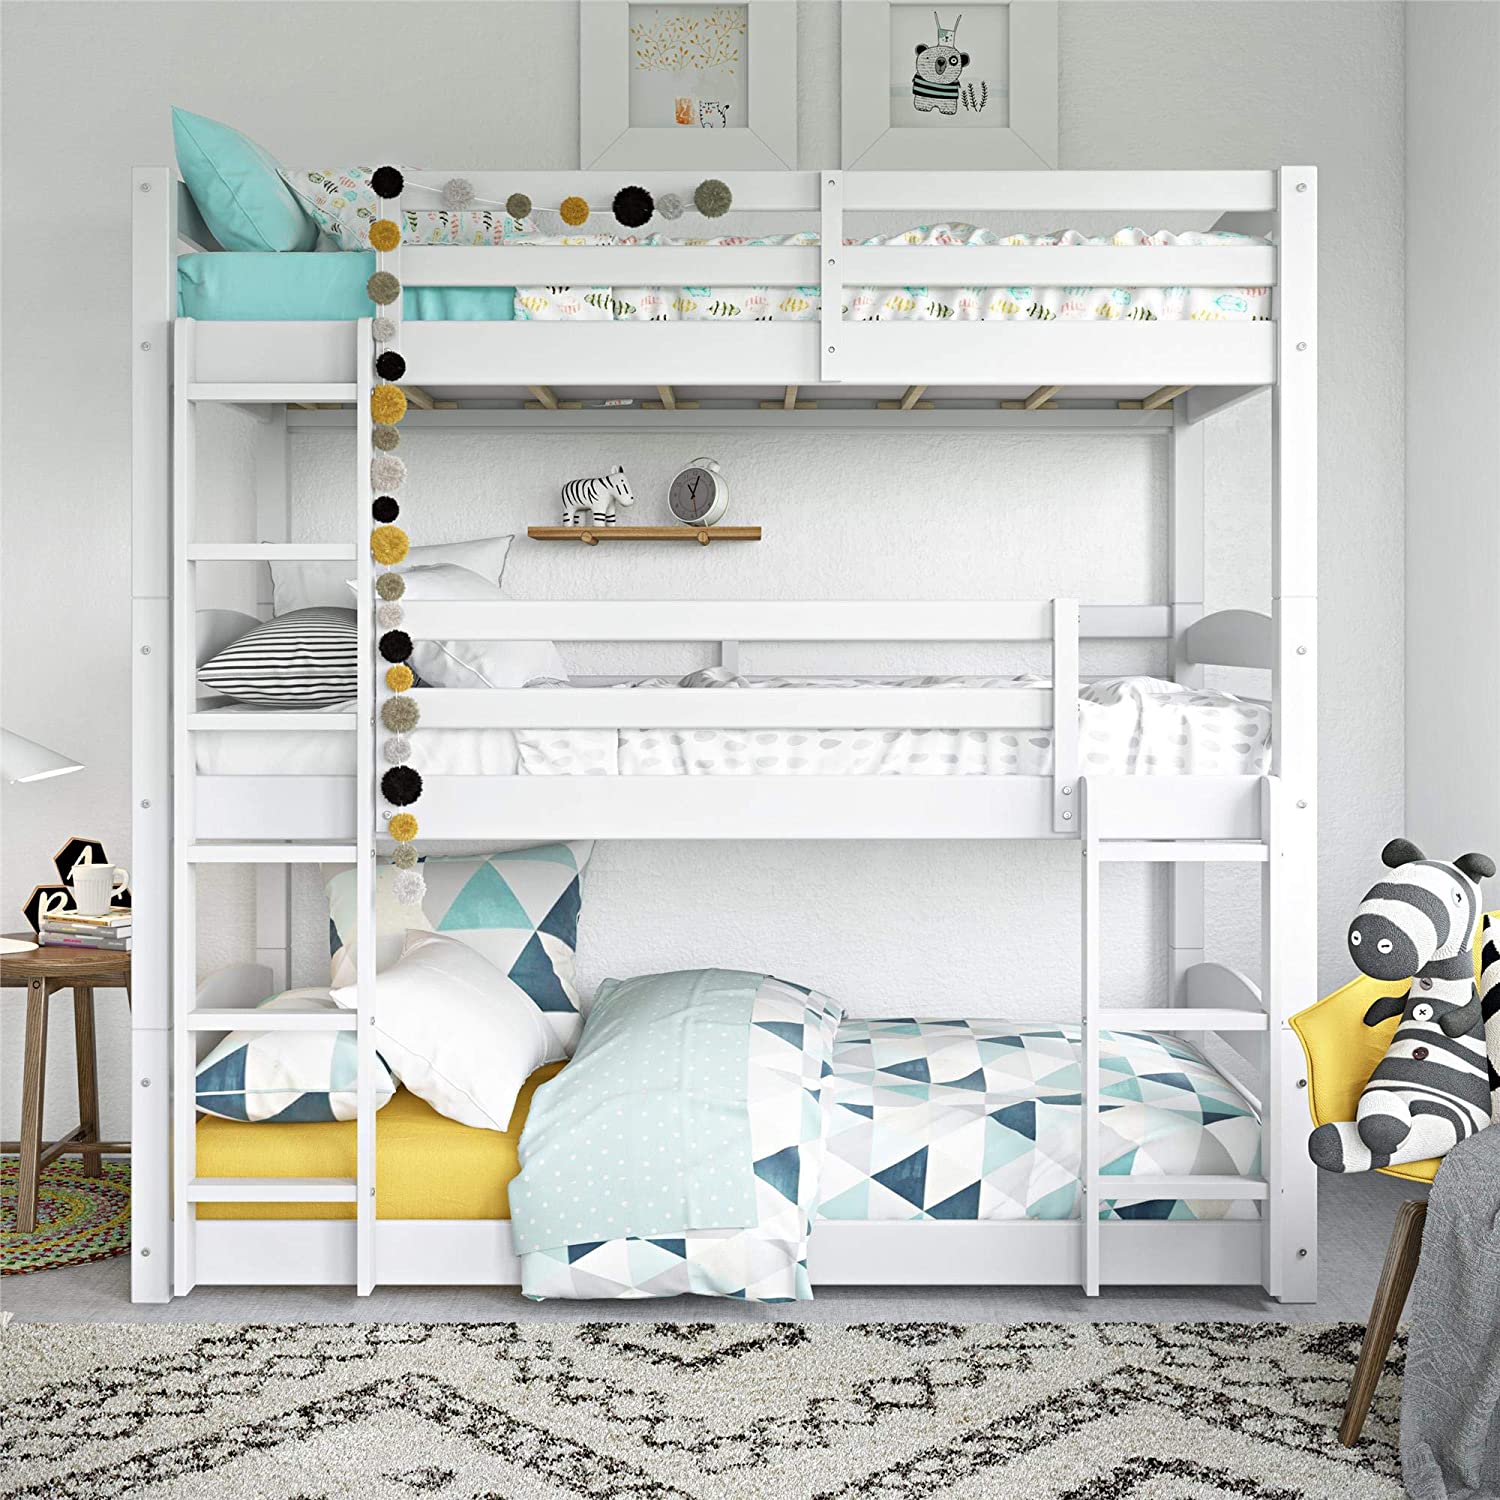 26 Bunk Beds You Ll Want For Yourself, Best Bedding For Bunk Beds